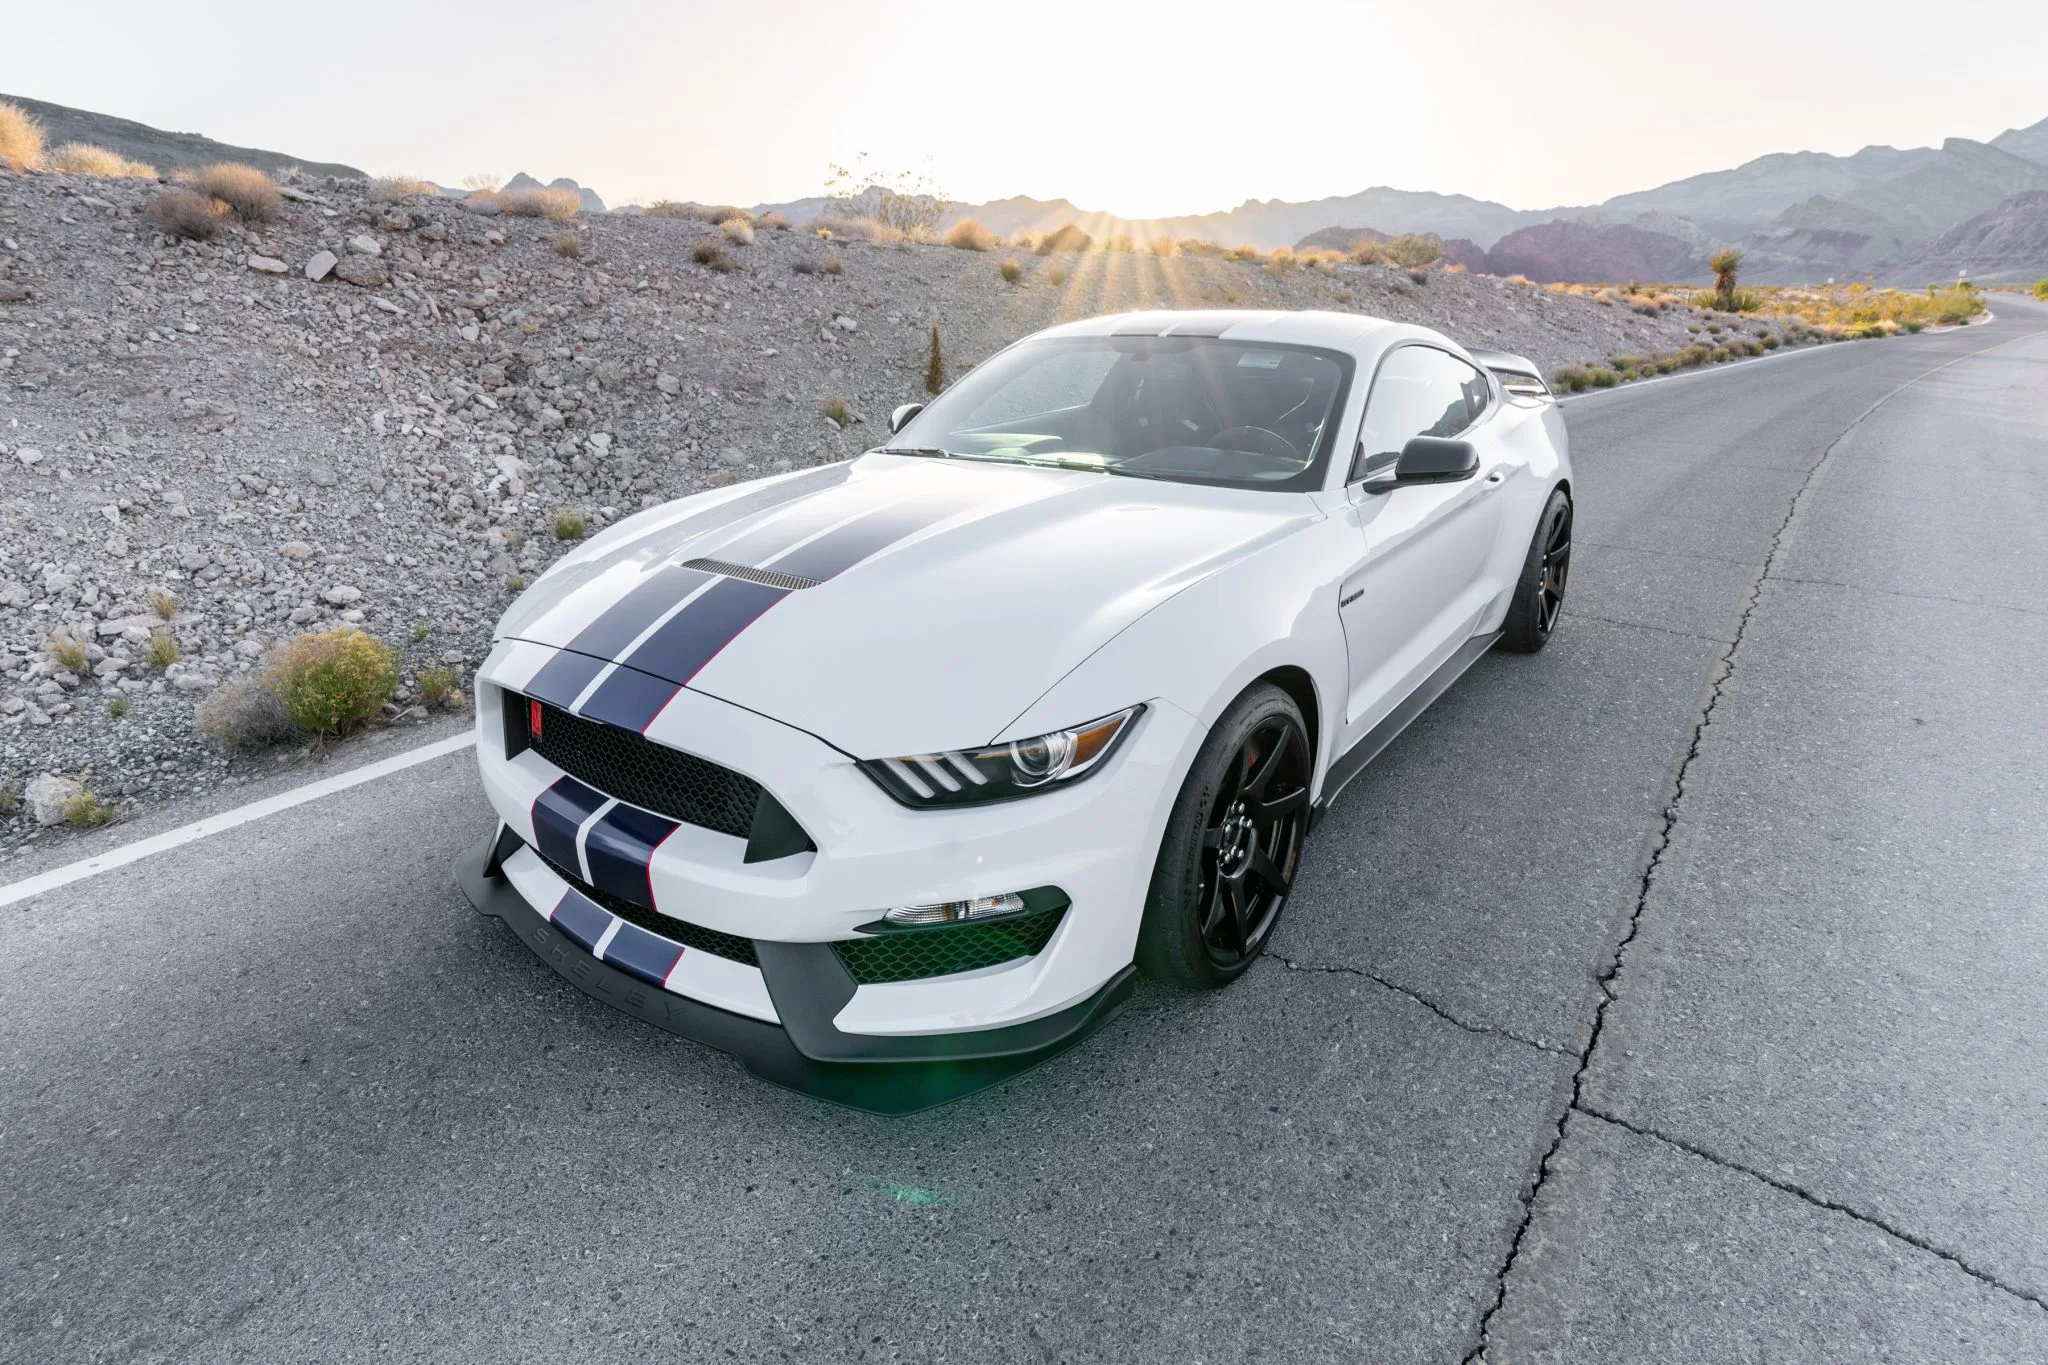 Mustang Of The Day: 2016 Ford Mustang Shelby GT350R